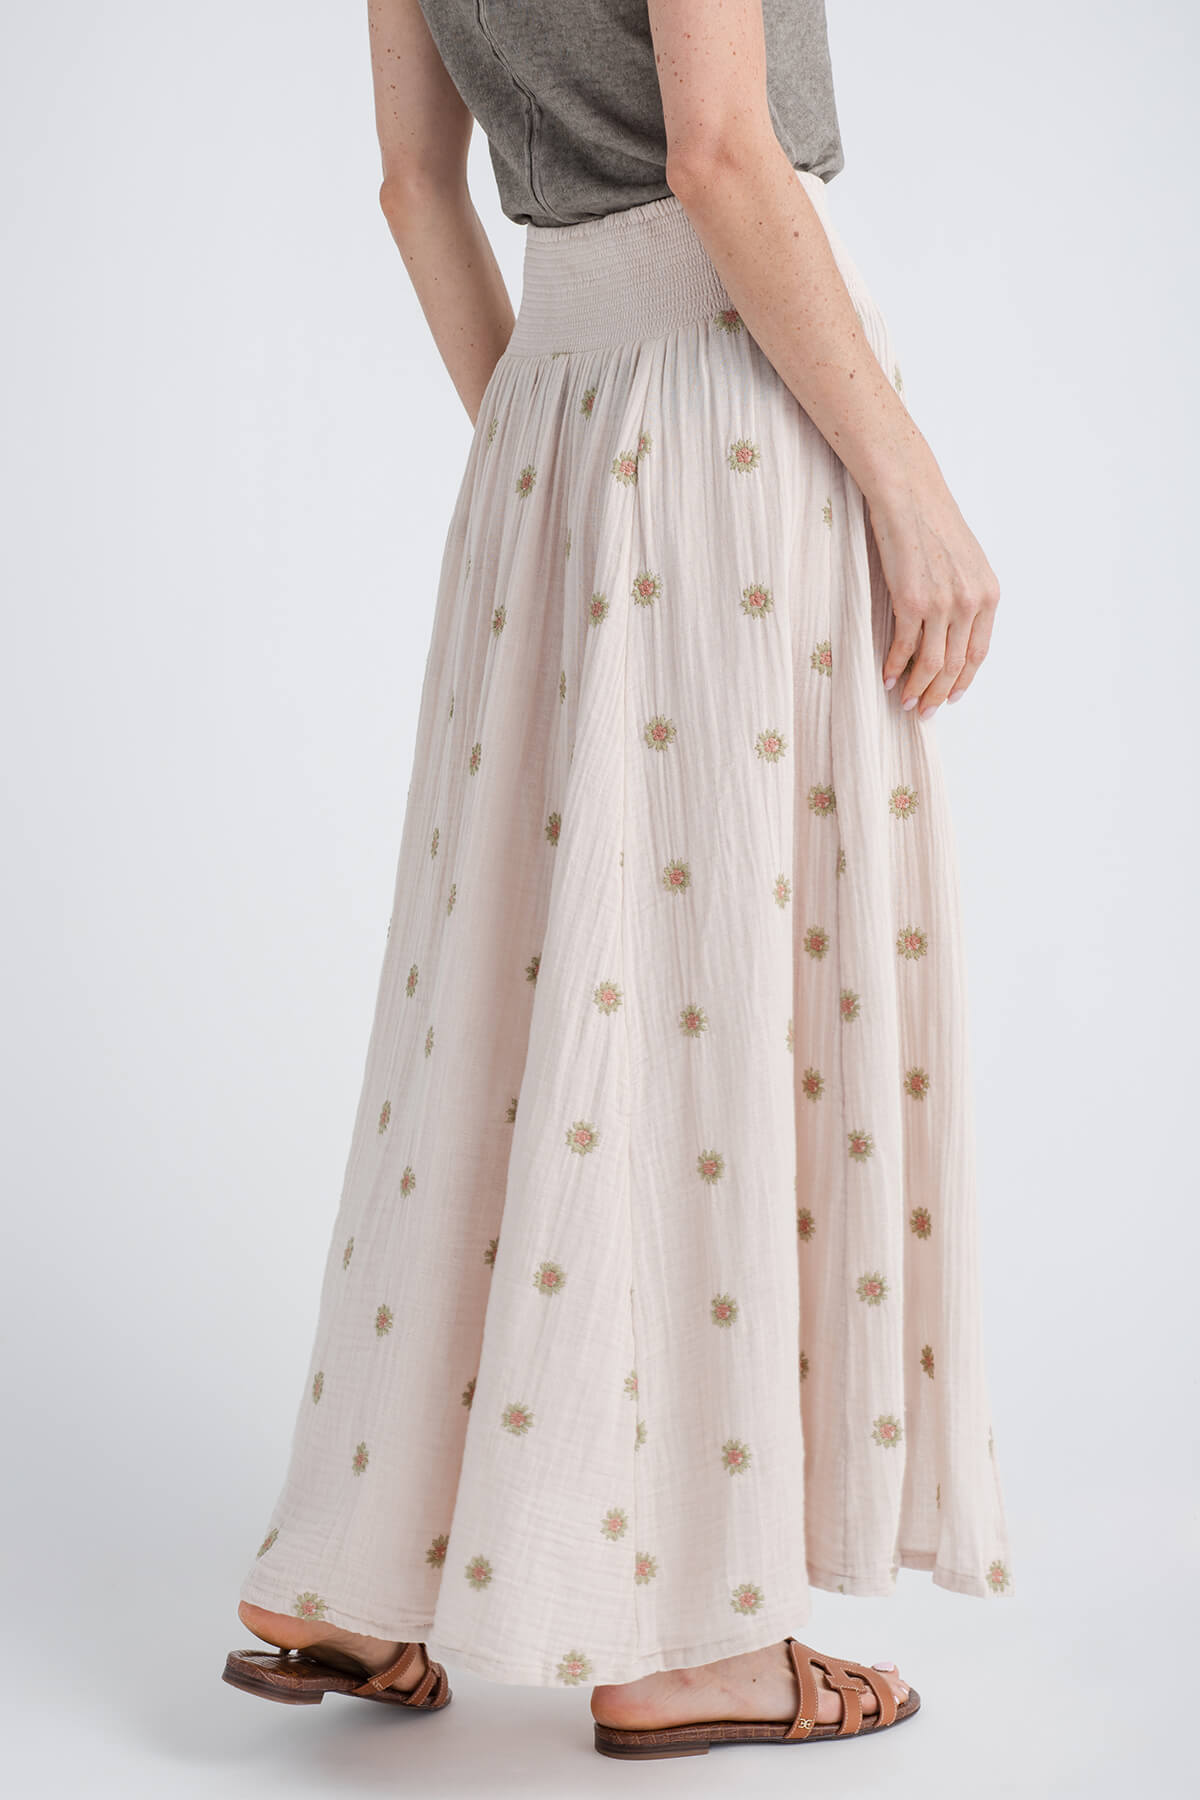 Free People Real Love Maxi Skirt